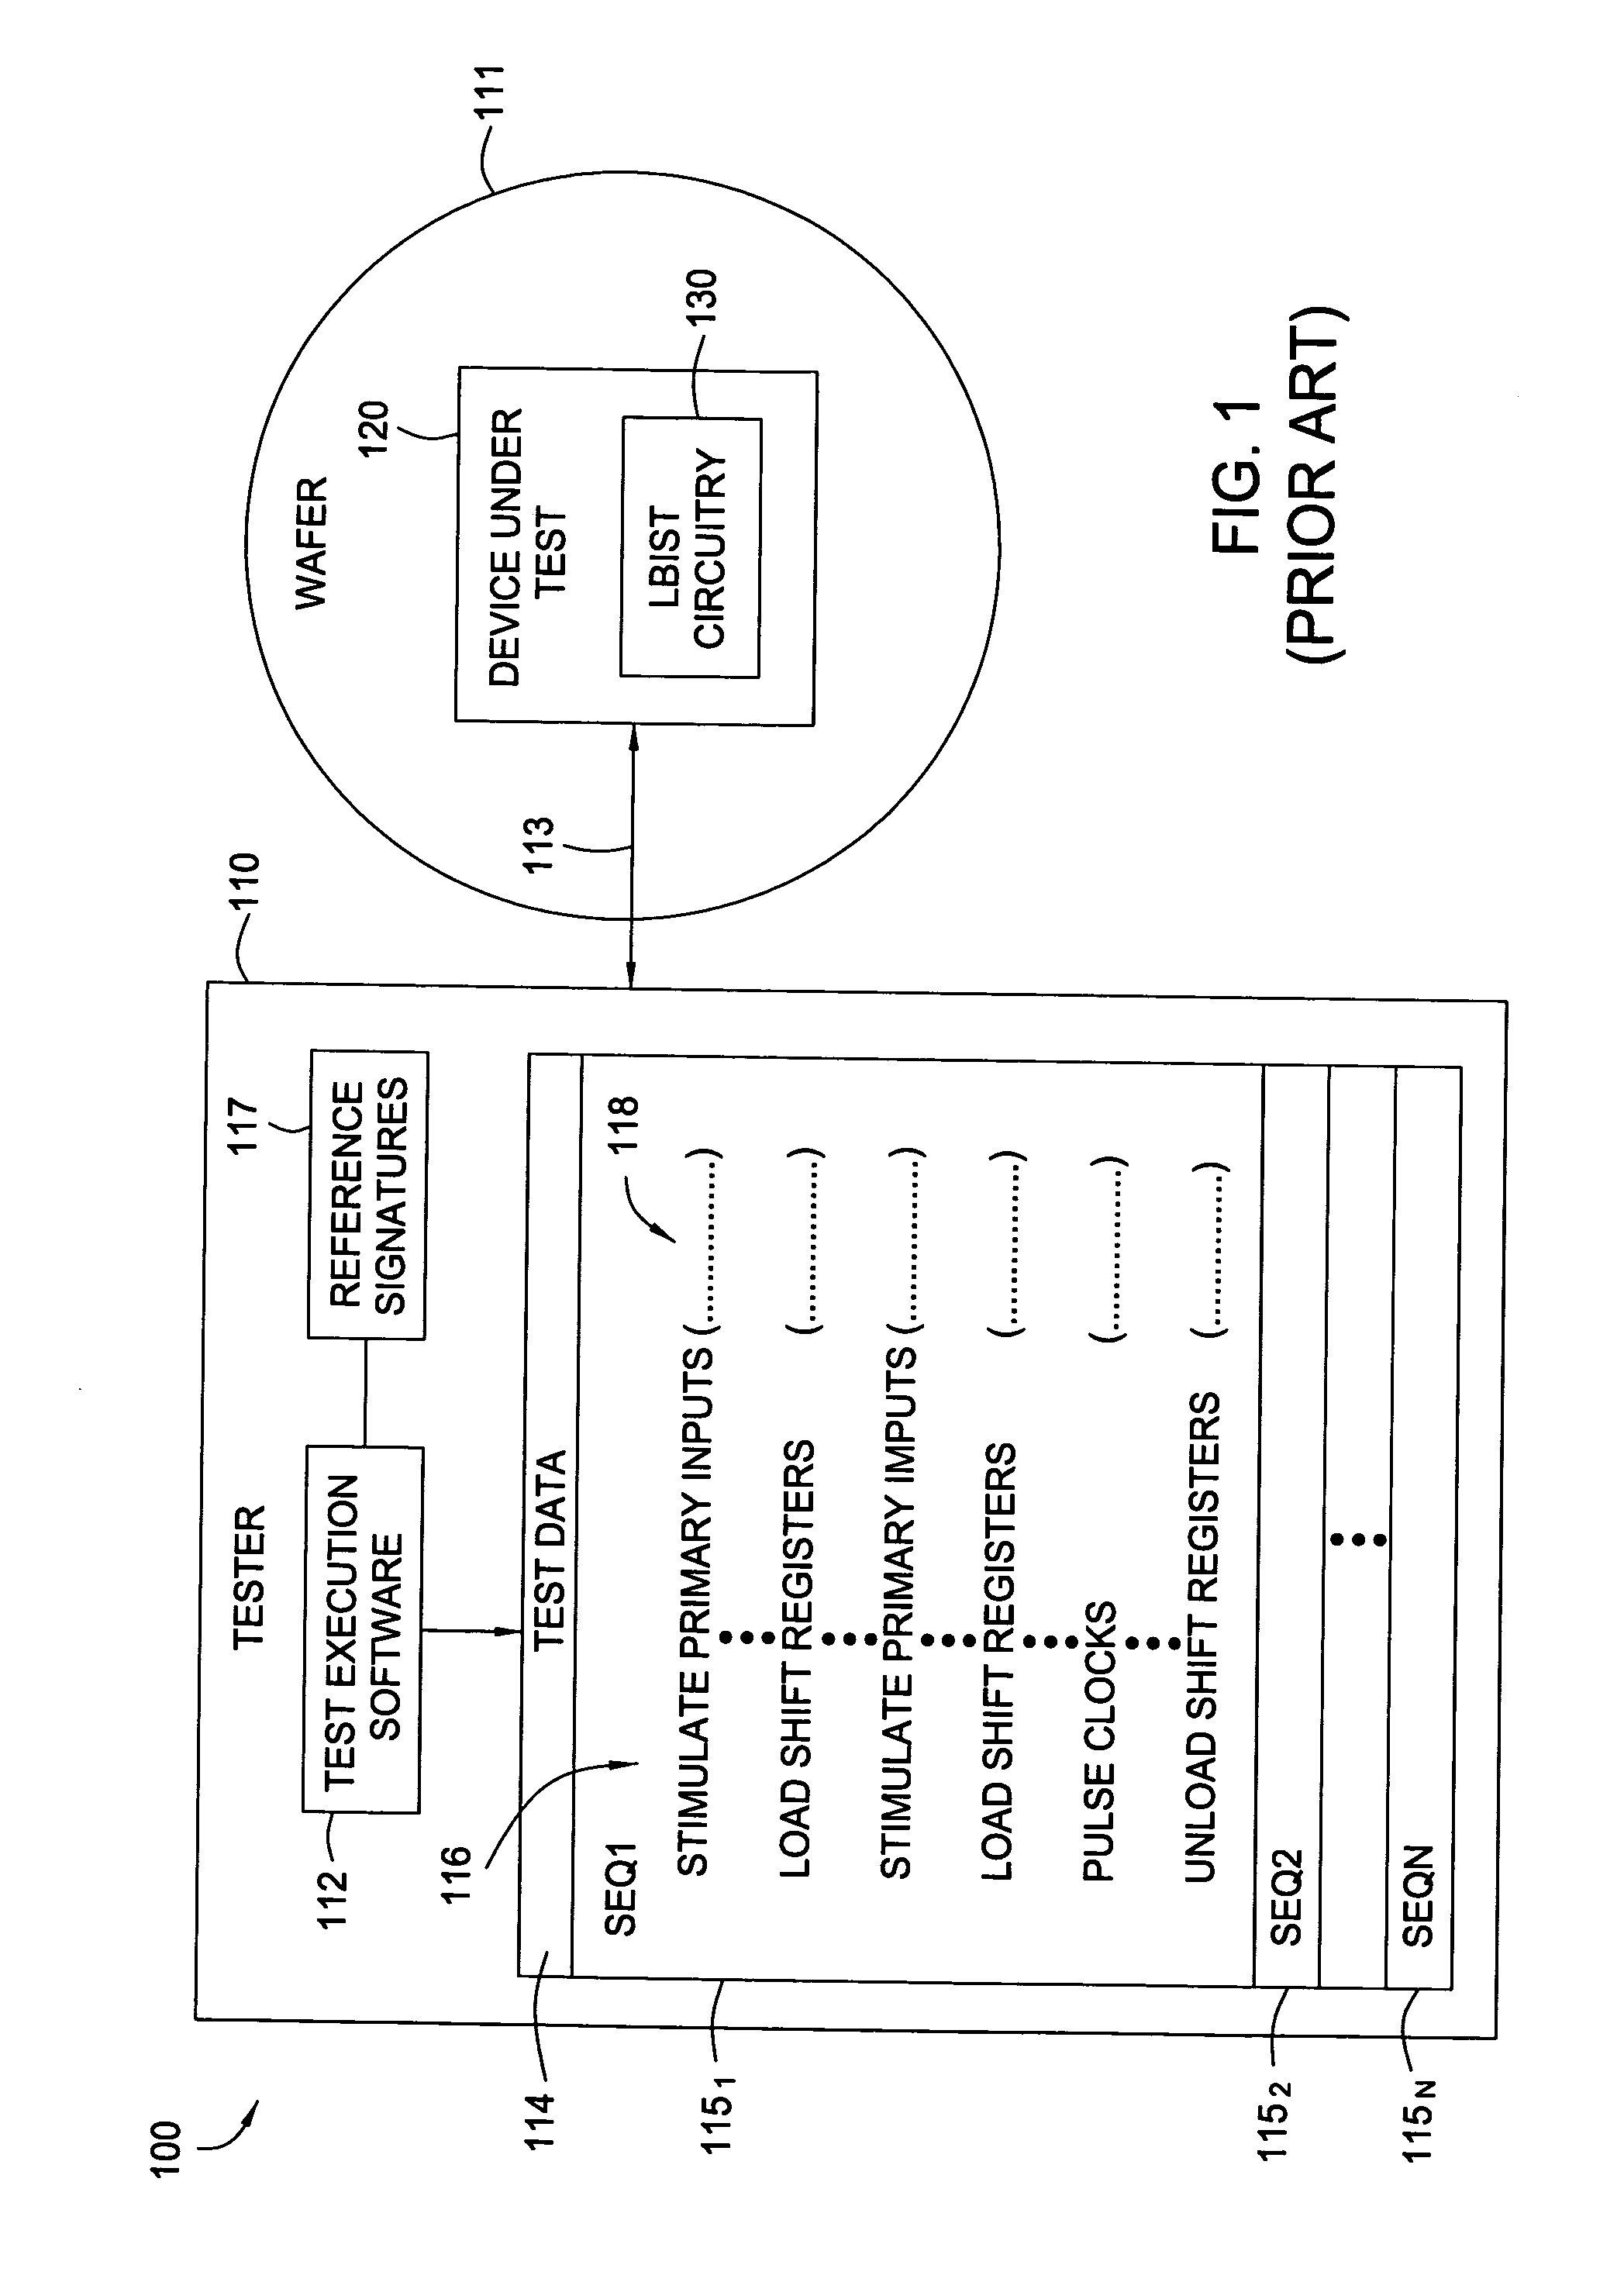 Automated BIST test pattern sequence generator software system and method